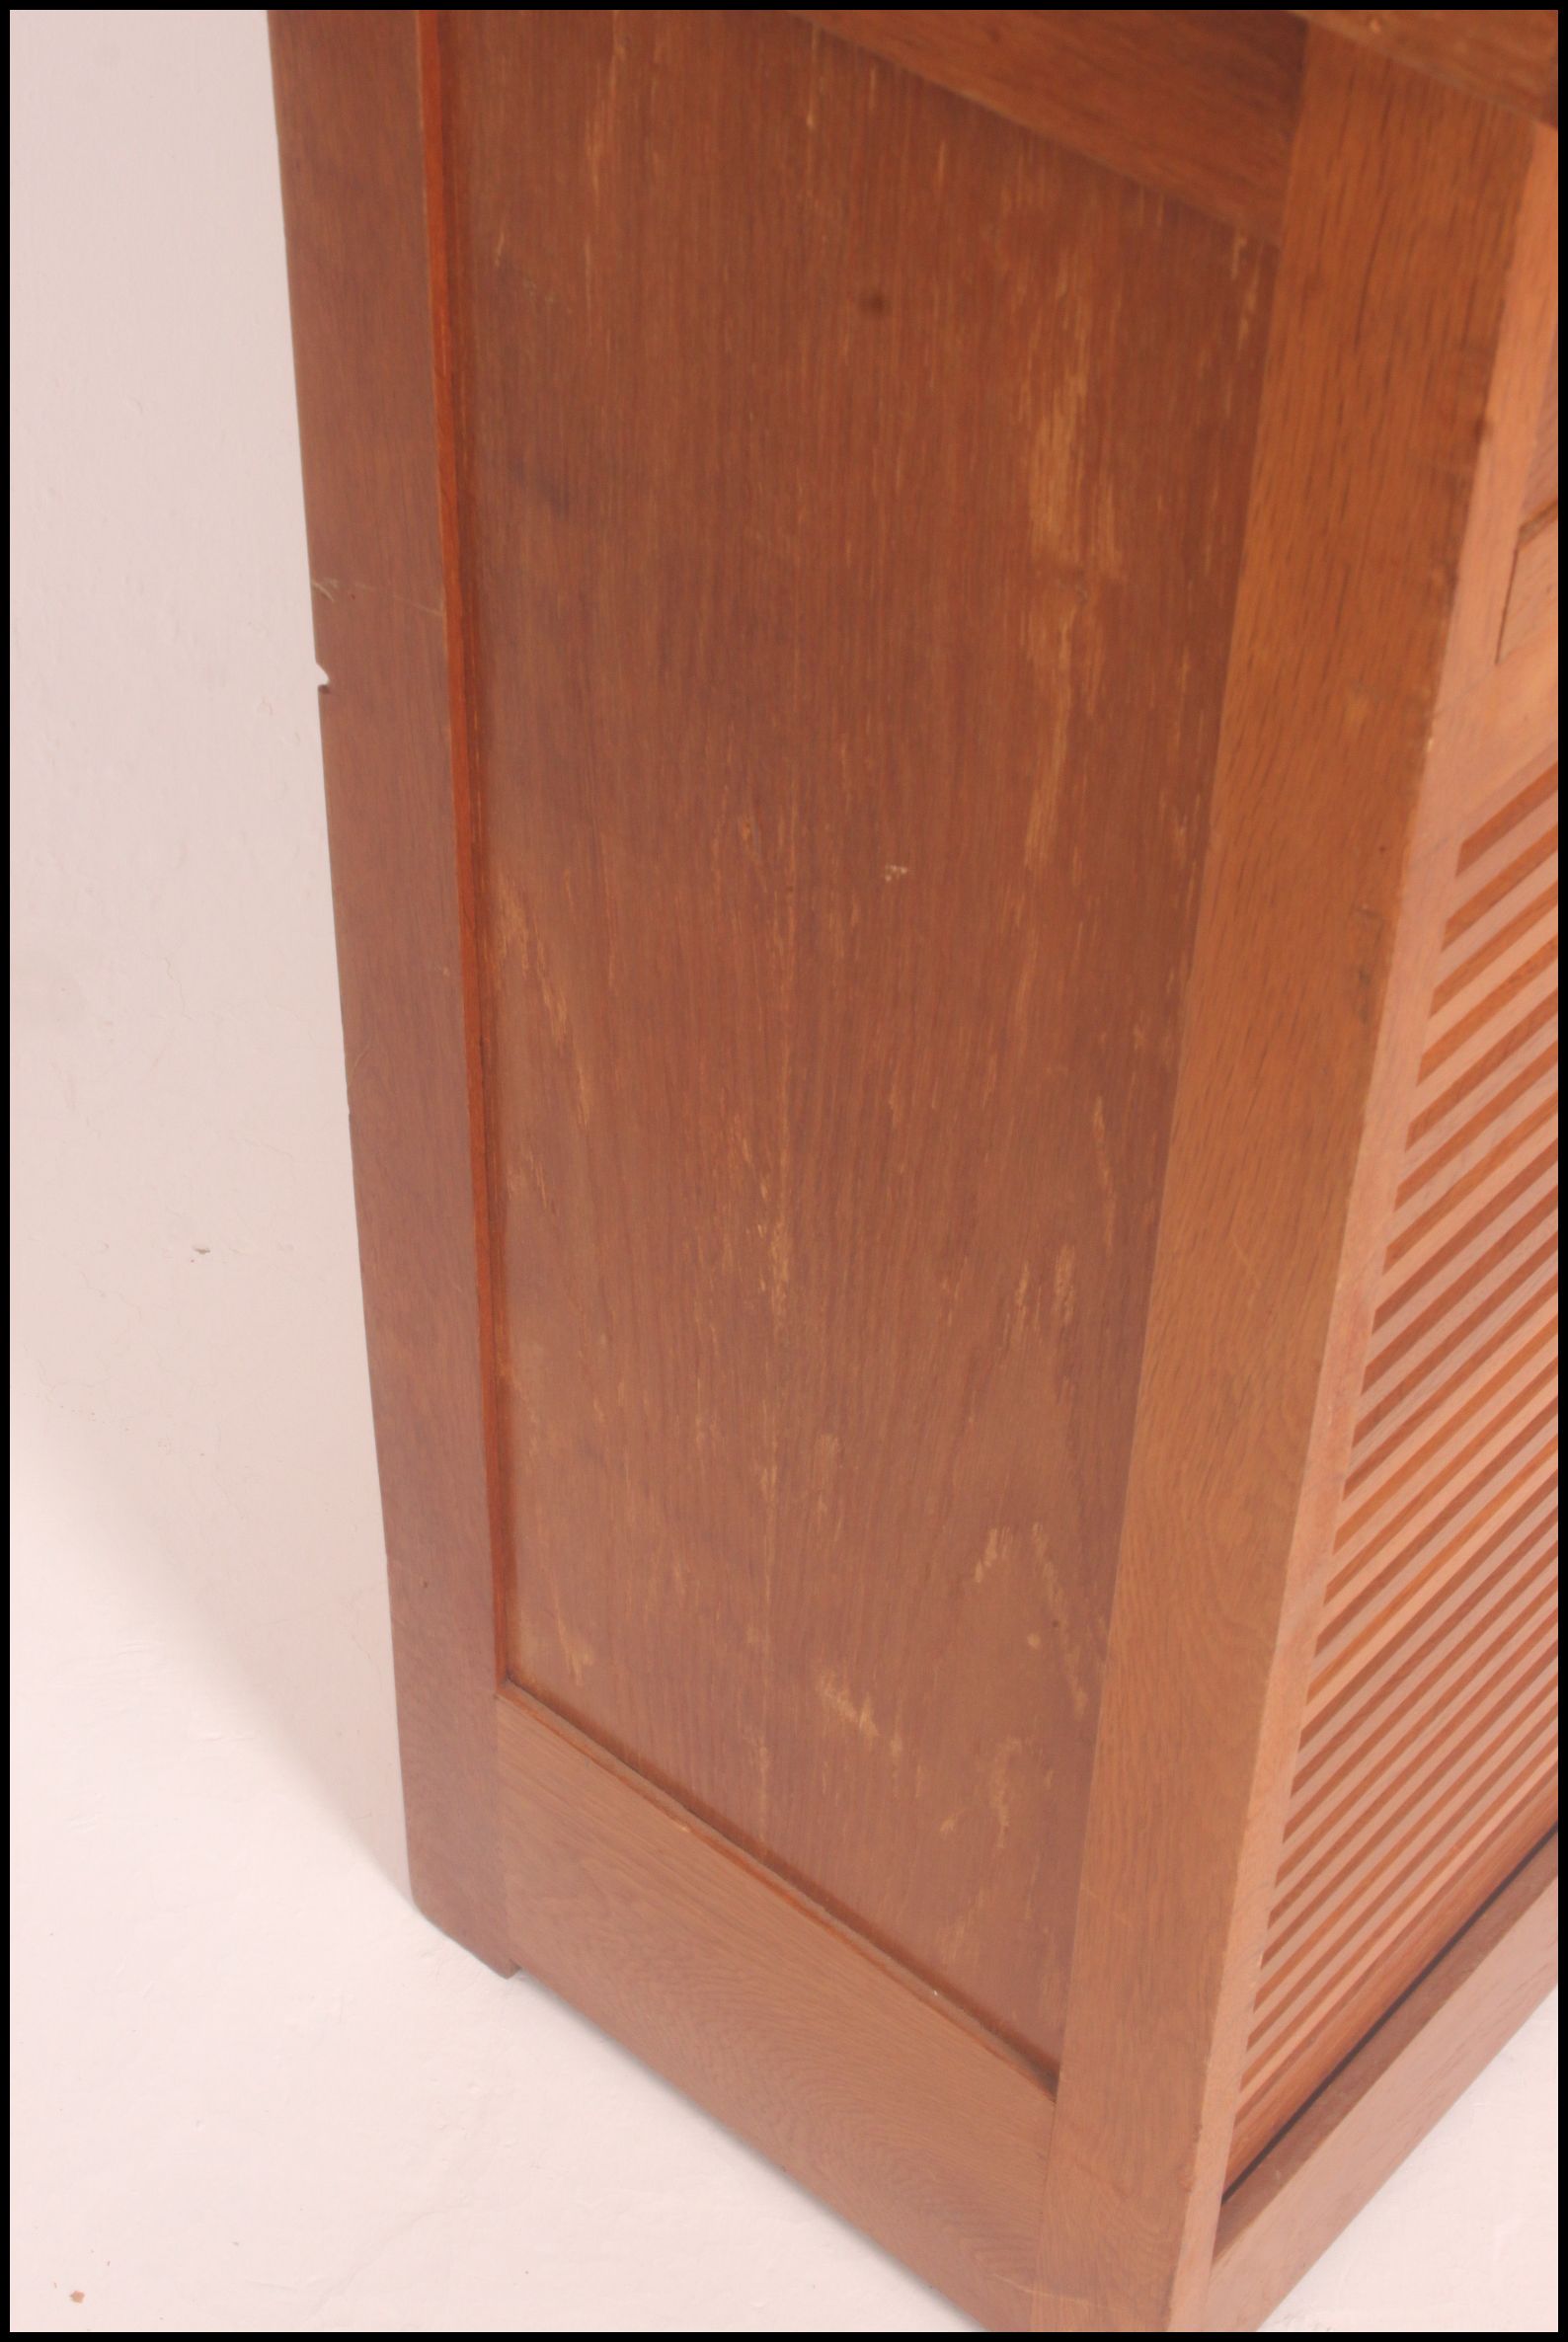 A 1940's /mid century oak Industrial office tambour filing cabinet system. - Image 7 of 7